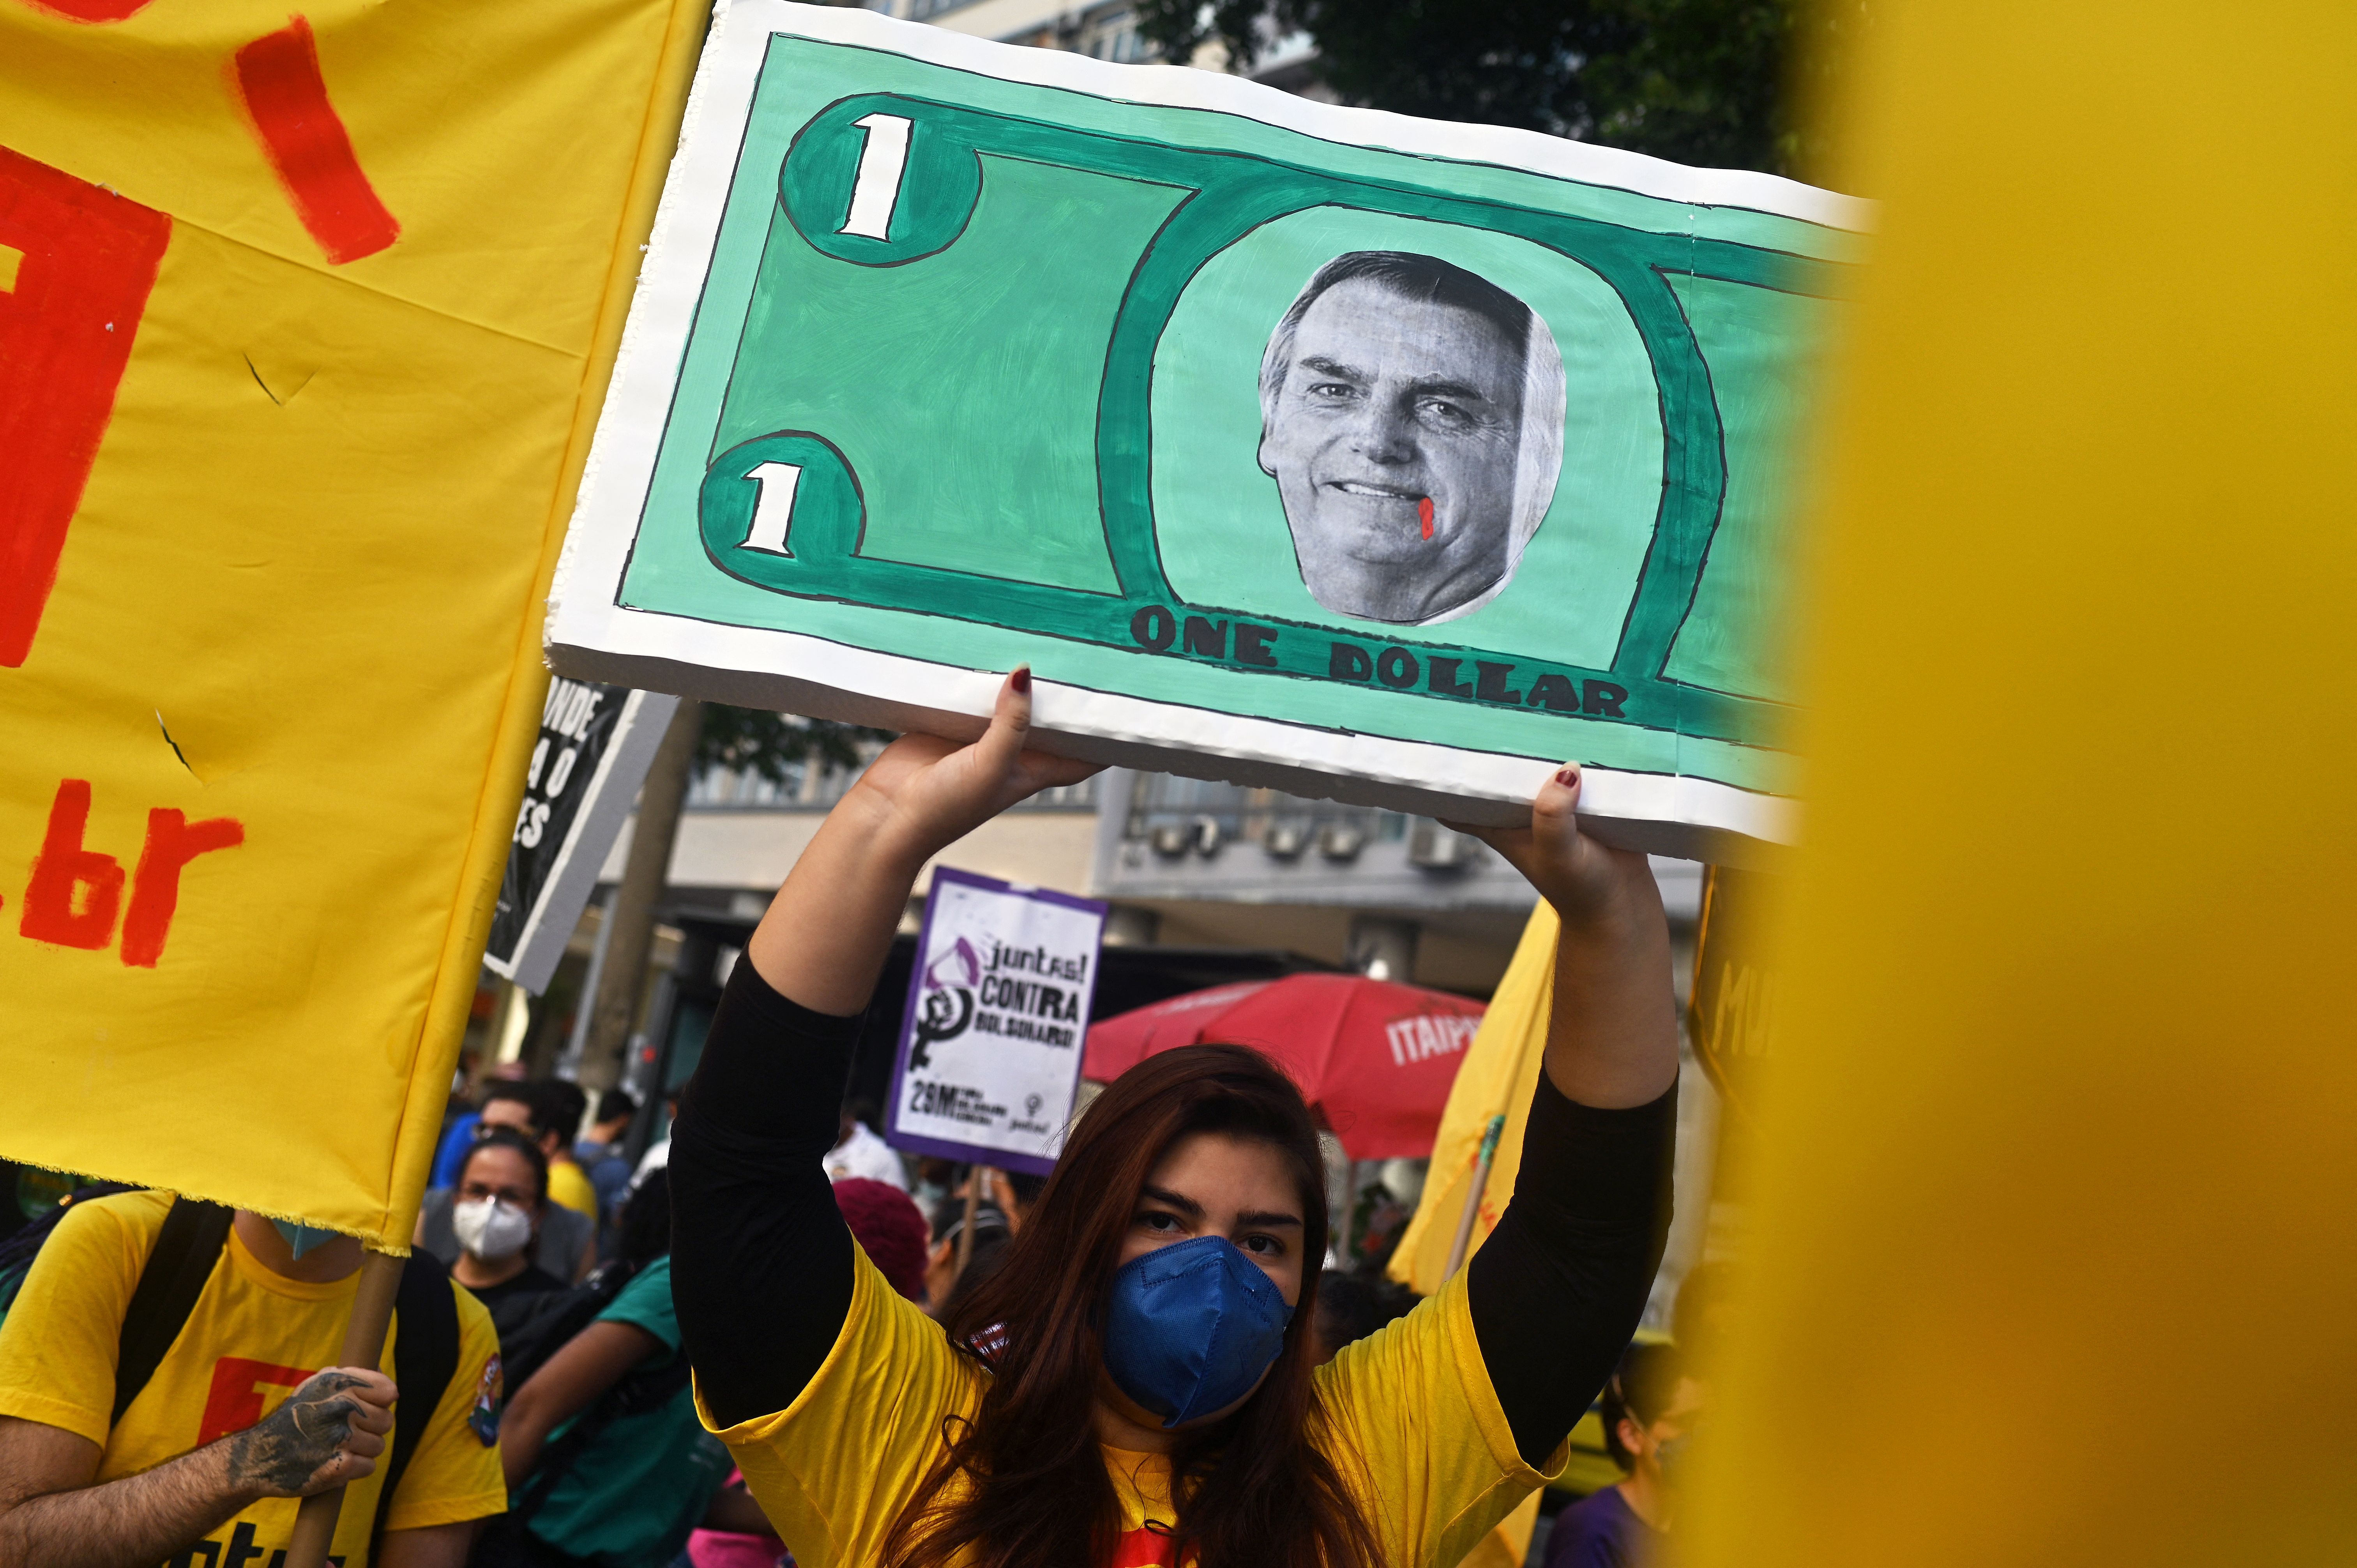  A woman holds a sign depicting Brazilian President Jair Bolsonaro in a dollar bill during a protest against his handling of the COVID-19 pandemic in downtown Rio de Janeiro, Brazil 